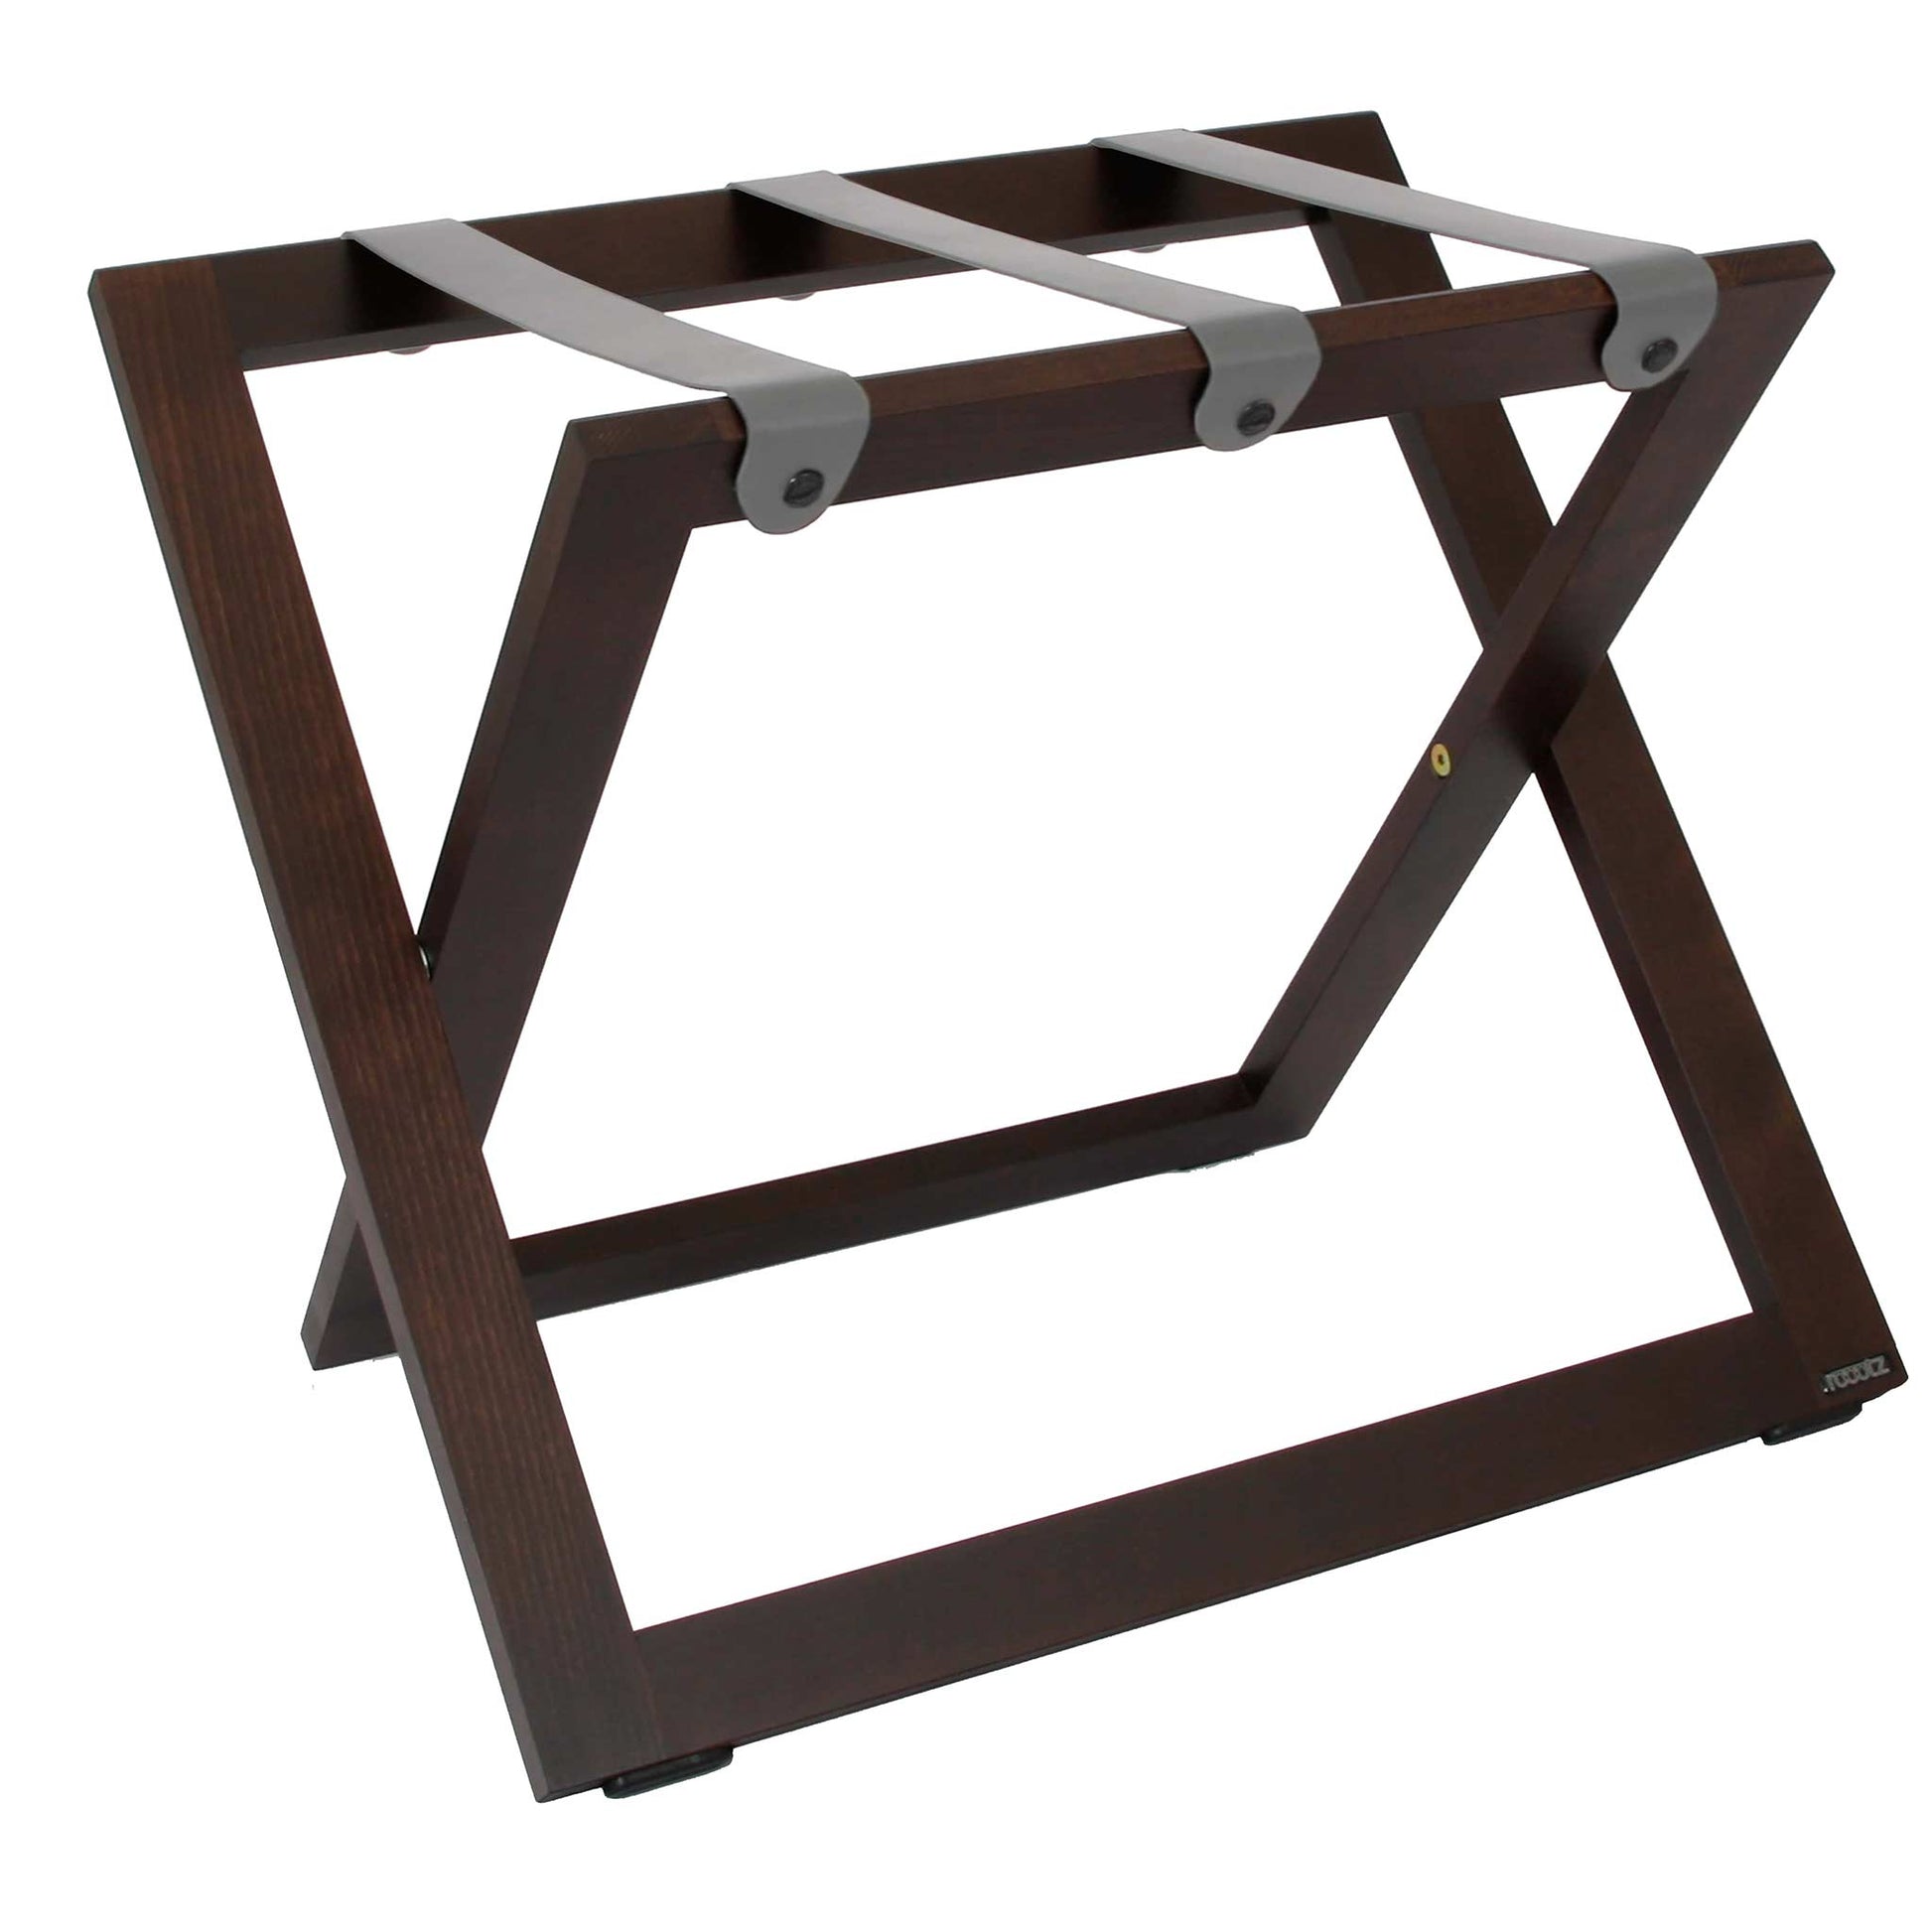 Roootz compact walnut wooden hotel luggage rack with grey leather straps